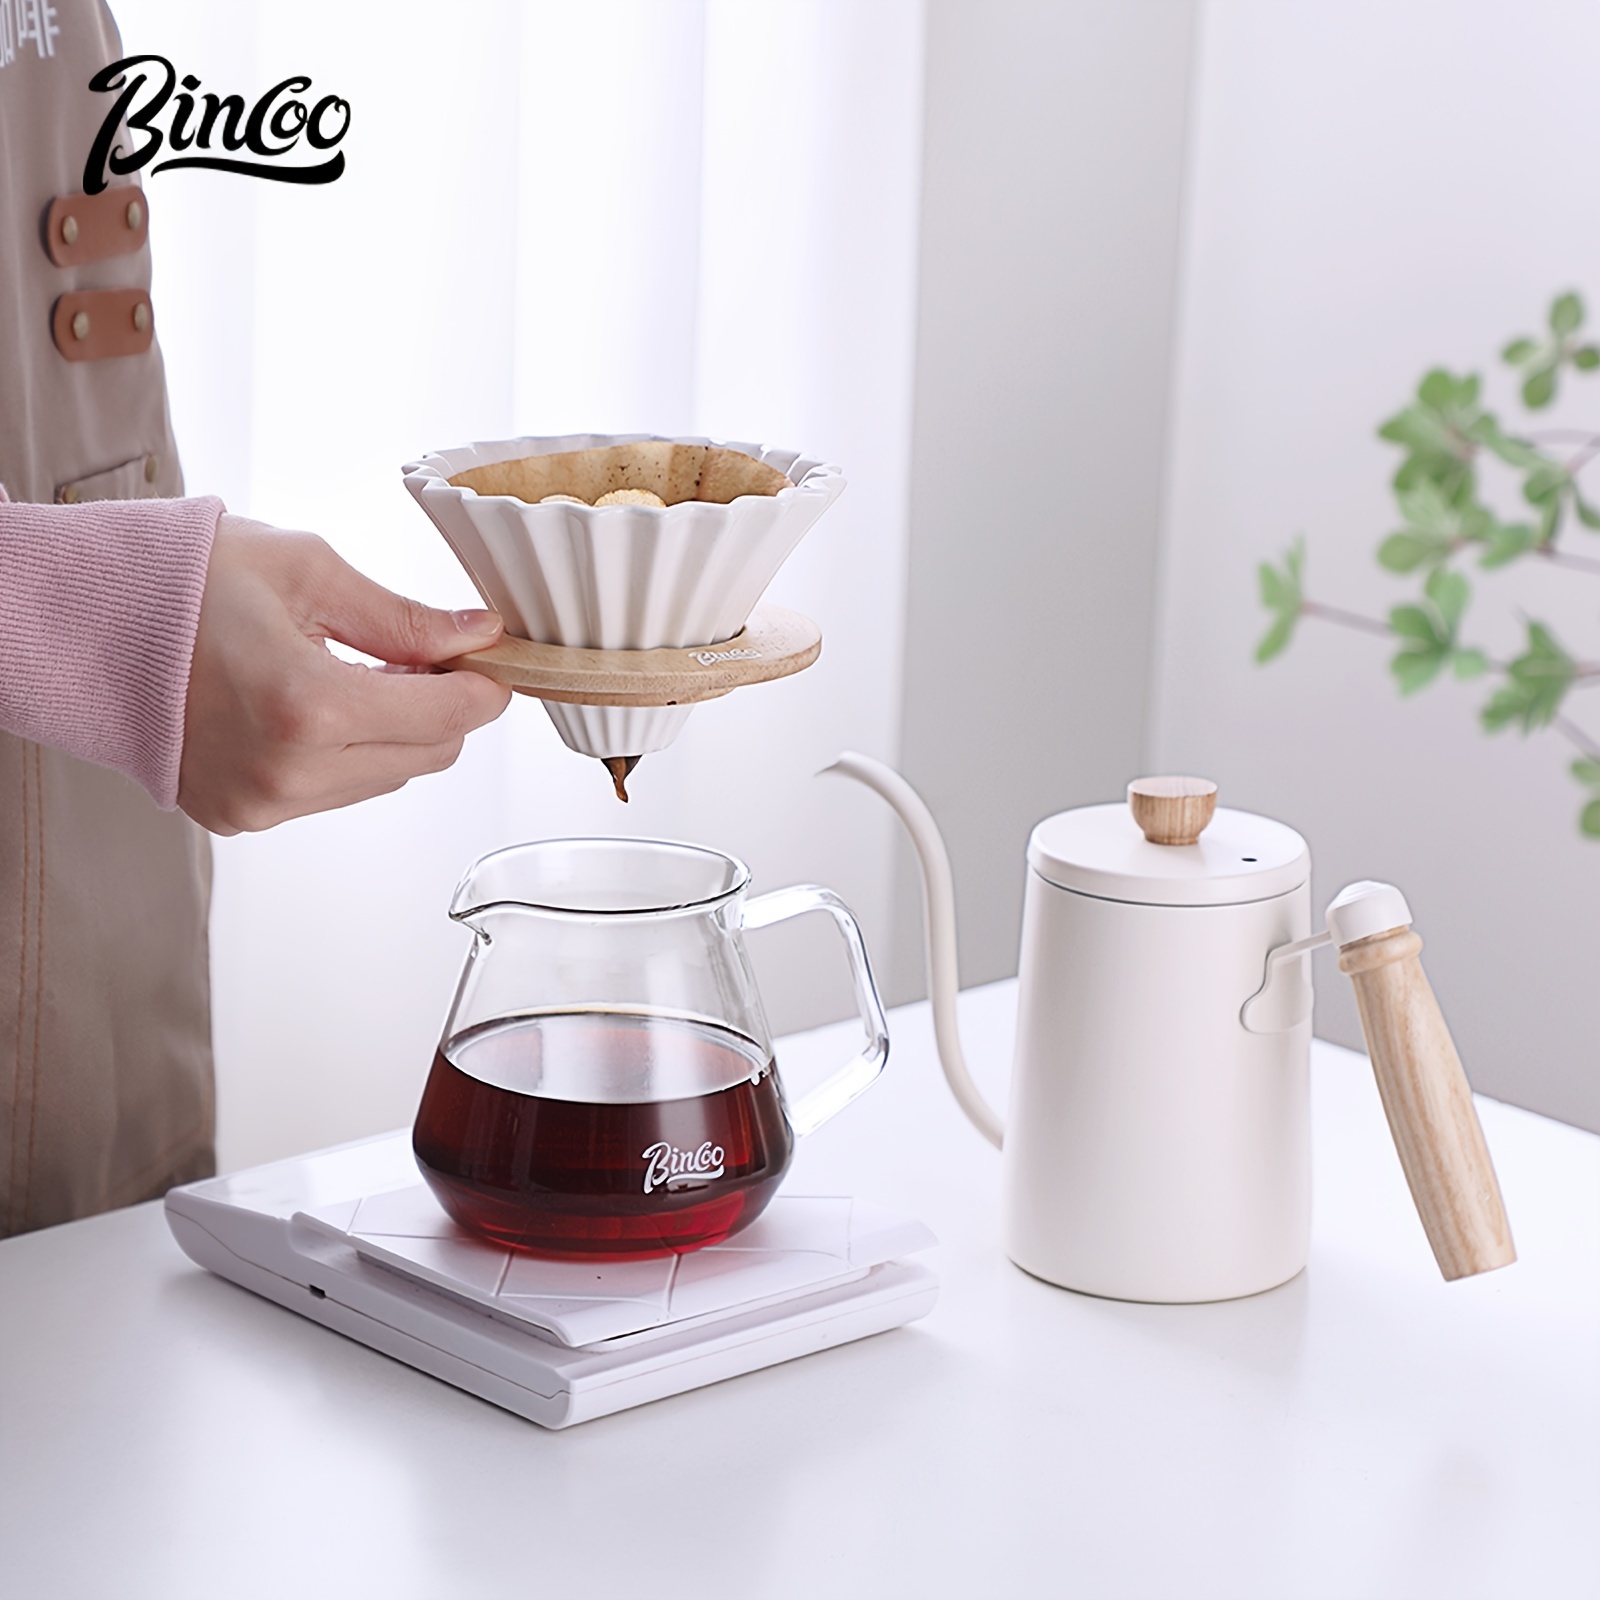 Manual Brewing 101: 3 Must Have Accessories for Making Coffee at Home